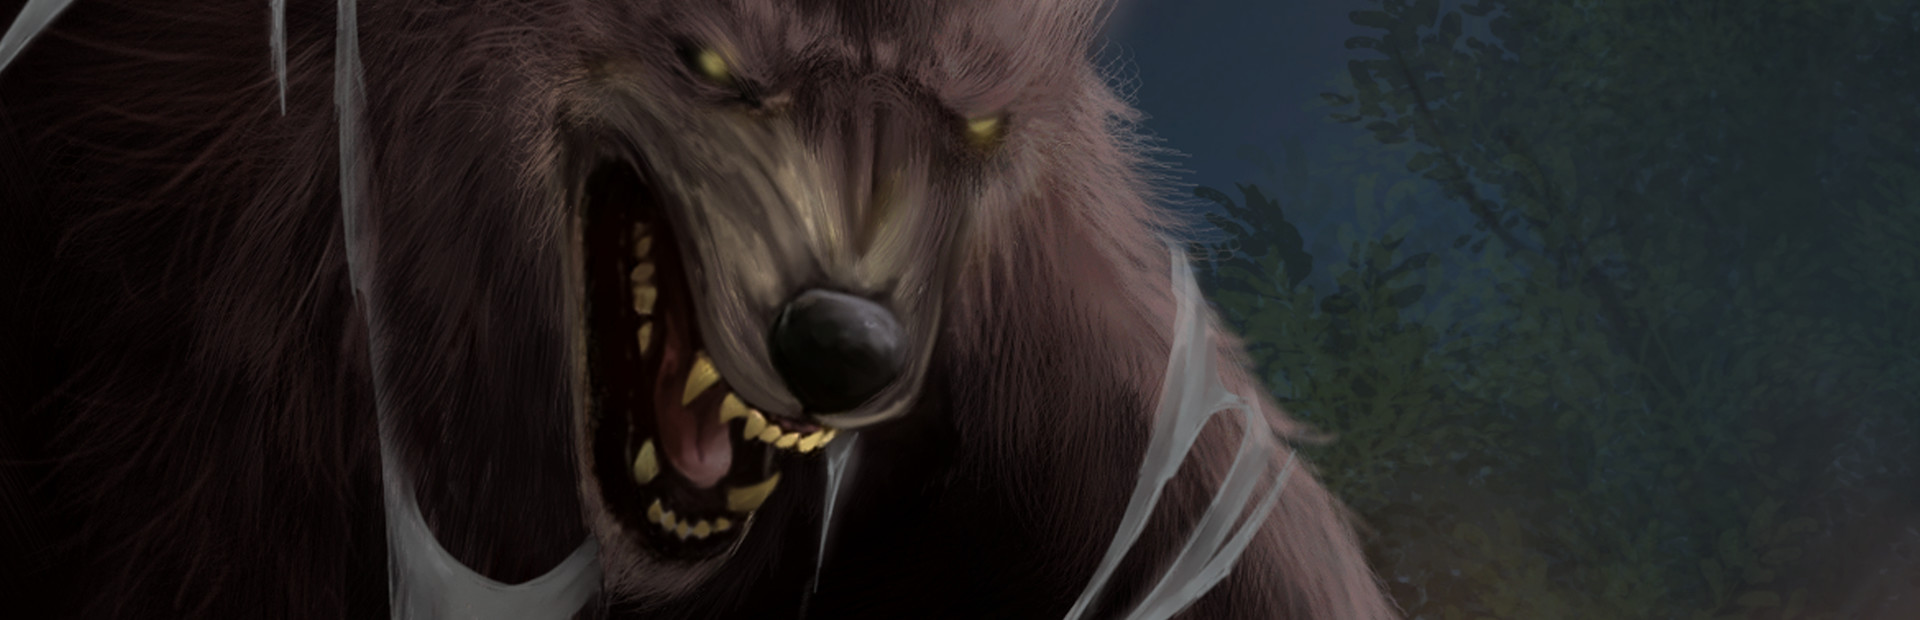 Werewolves 2: Pack Mentality cover image